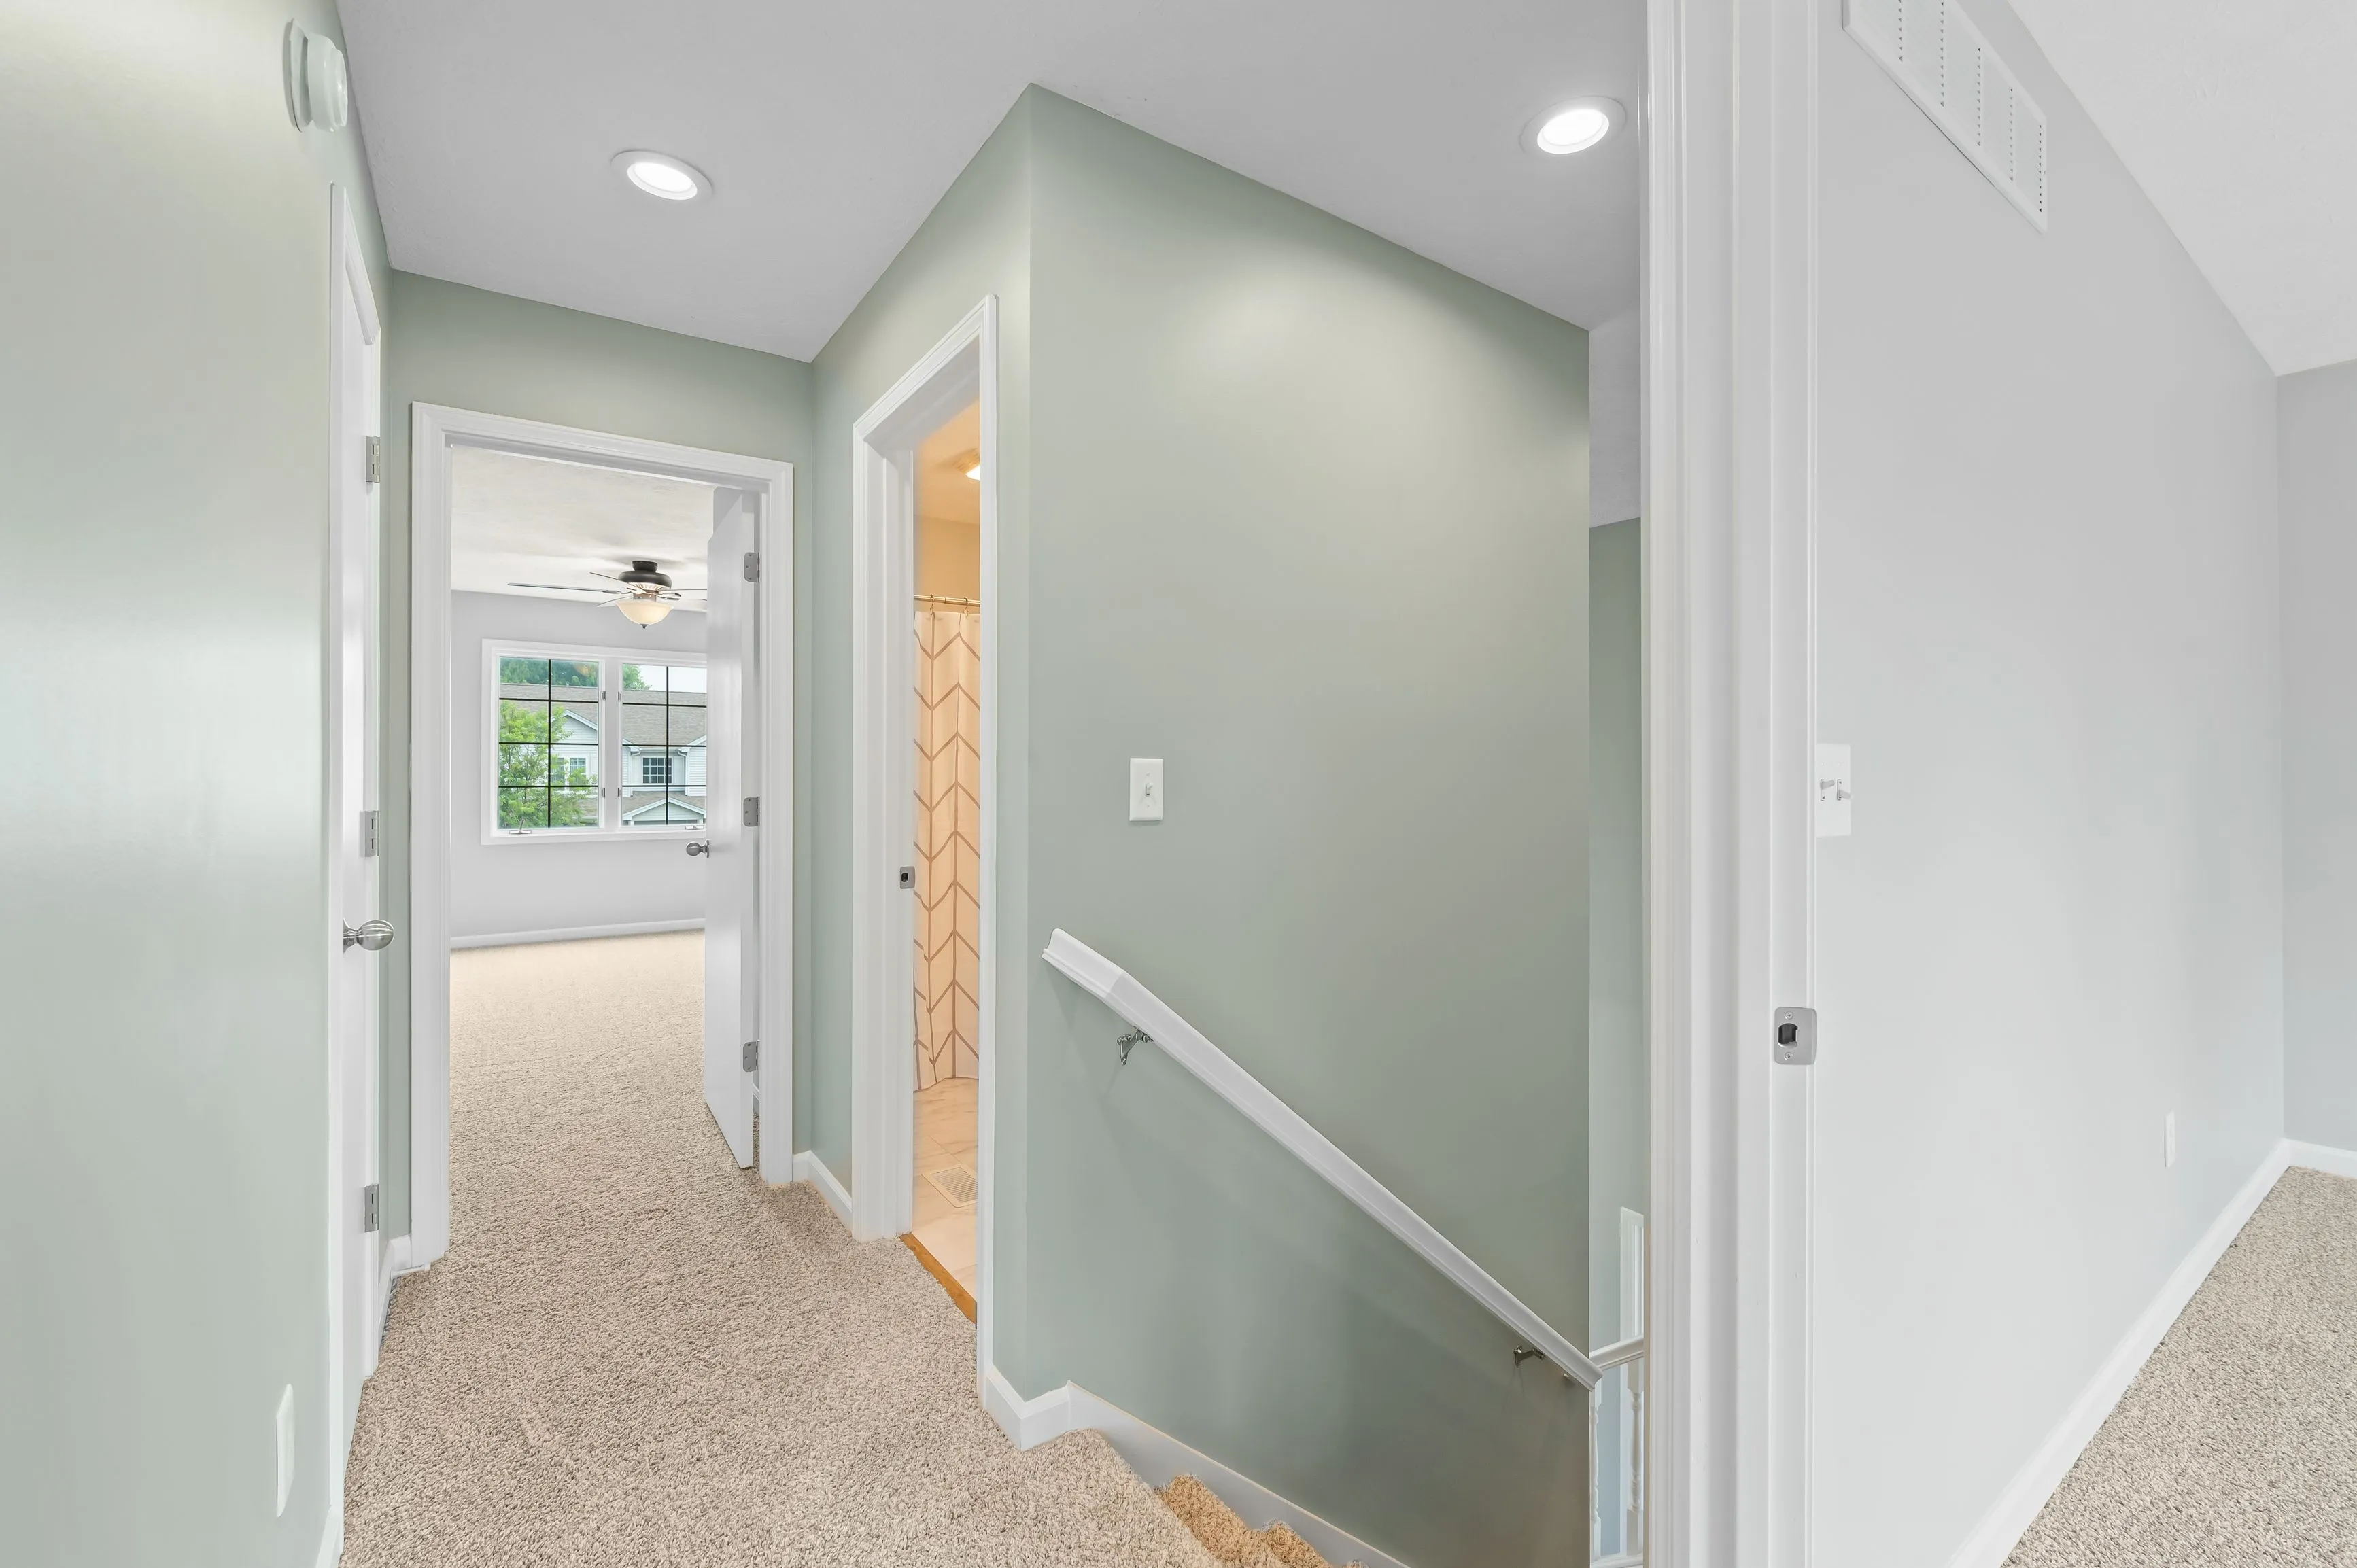 Bright hallway in a modern home with beige carpeting and white walls, featuring a railing and multiple doors leading to different rooms.